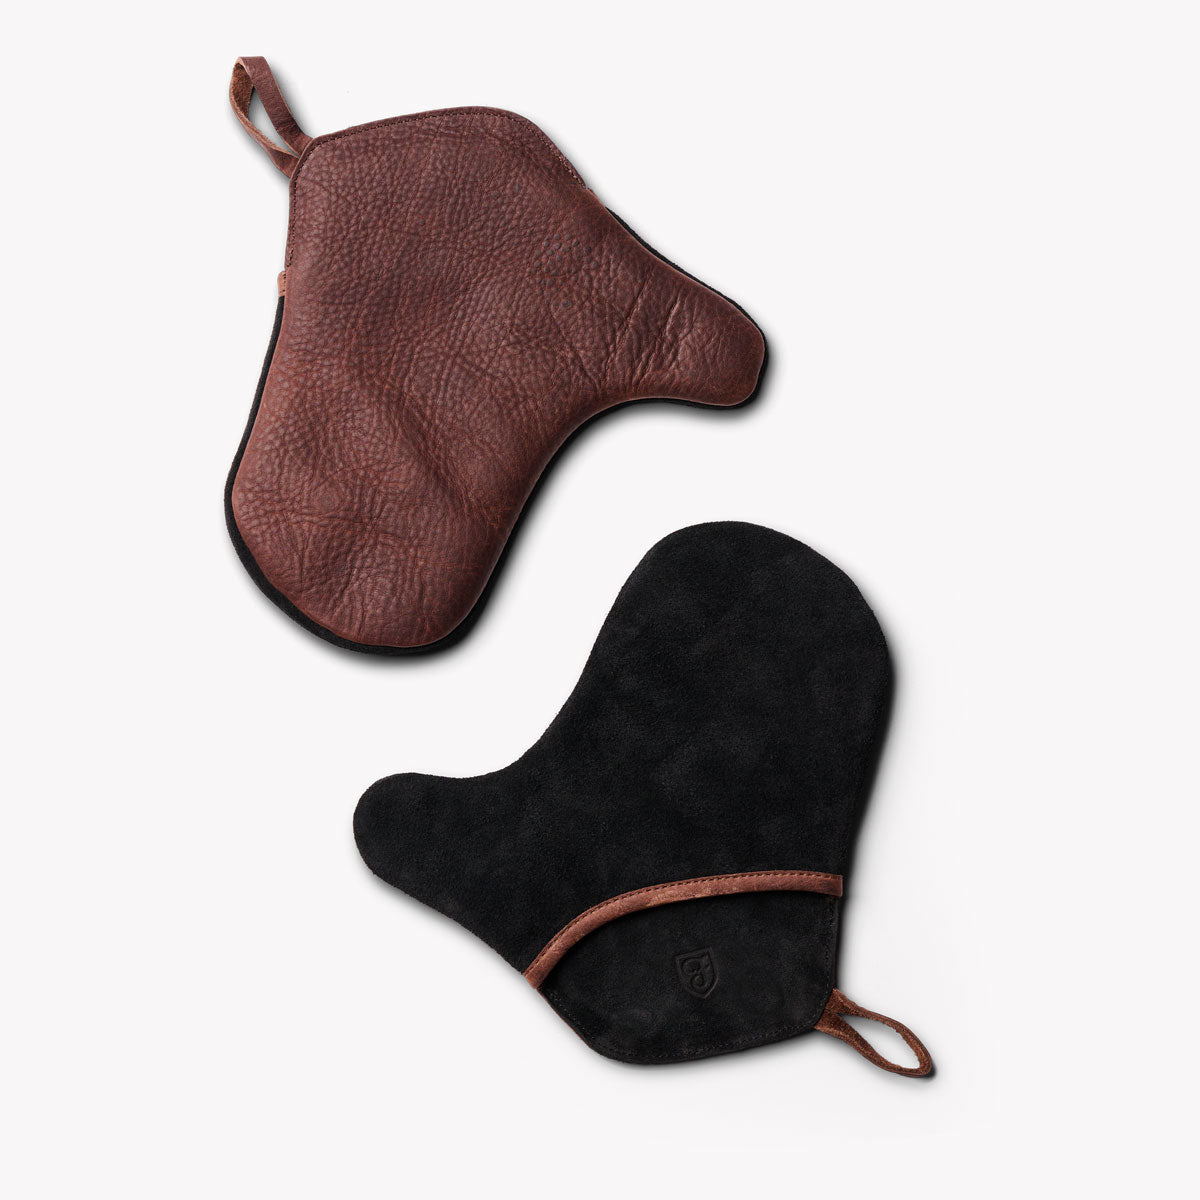 Premium Quality Buffalo Leather Oven Mitt for Use With Oven, Stove,  Fireplace or BBQ. This Luxury Leather Gift for Men is Made in Holland. 